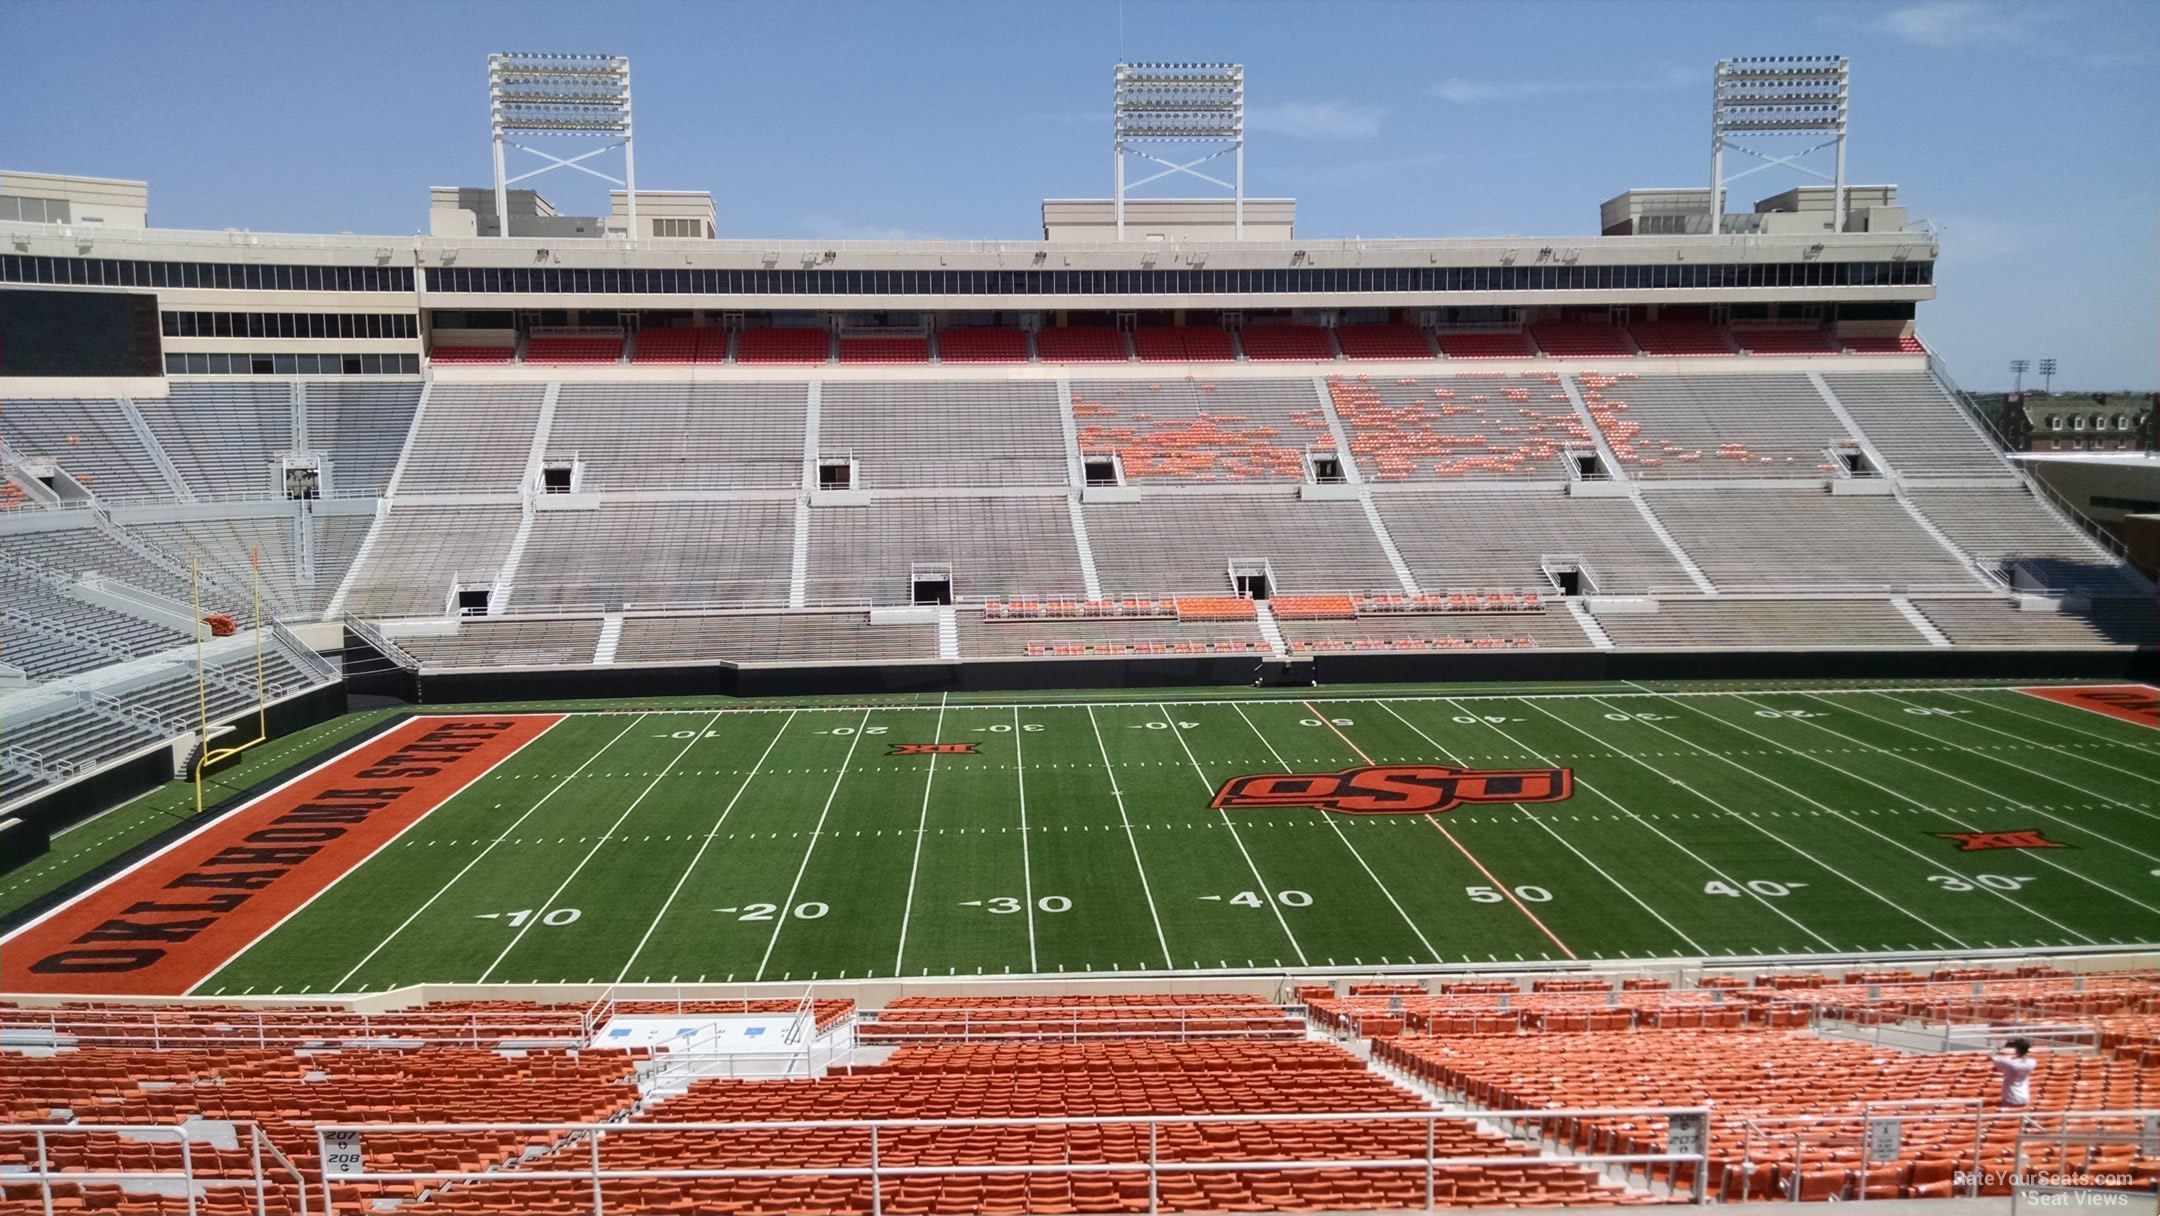 section 307, row 19 seat view  - boone pickens stadium